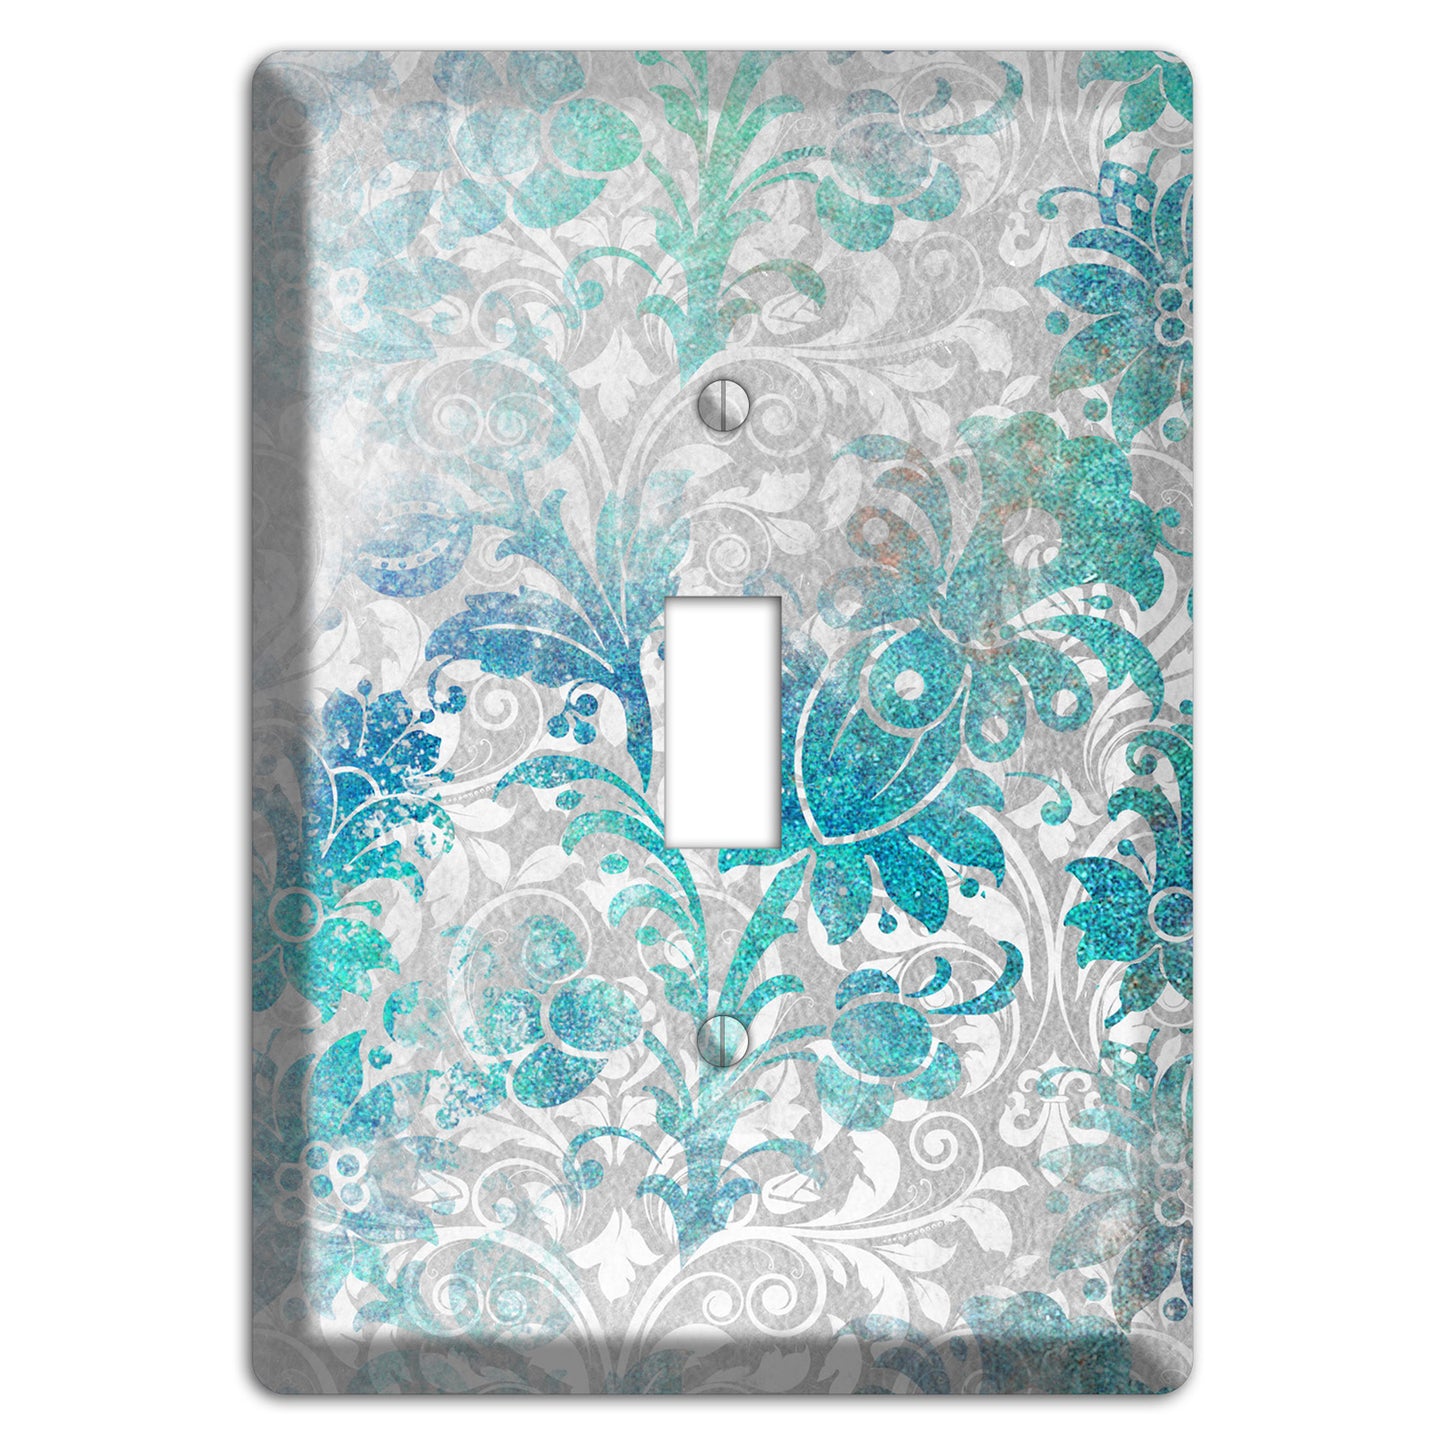 Gulf Stream Whimsical Damask Cover Plates